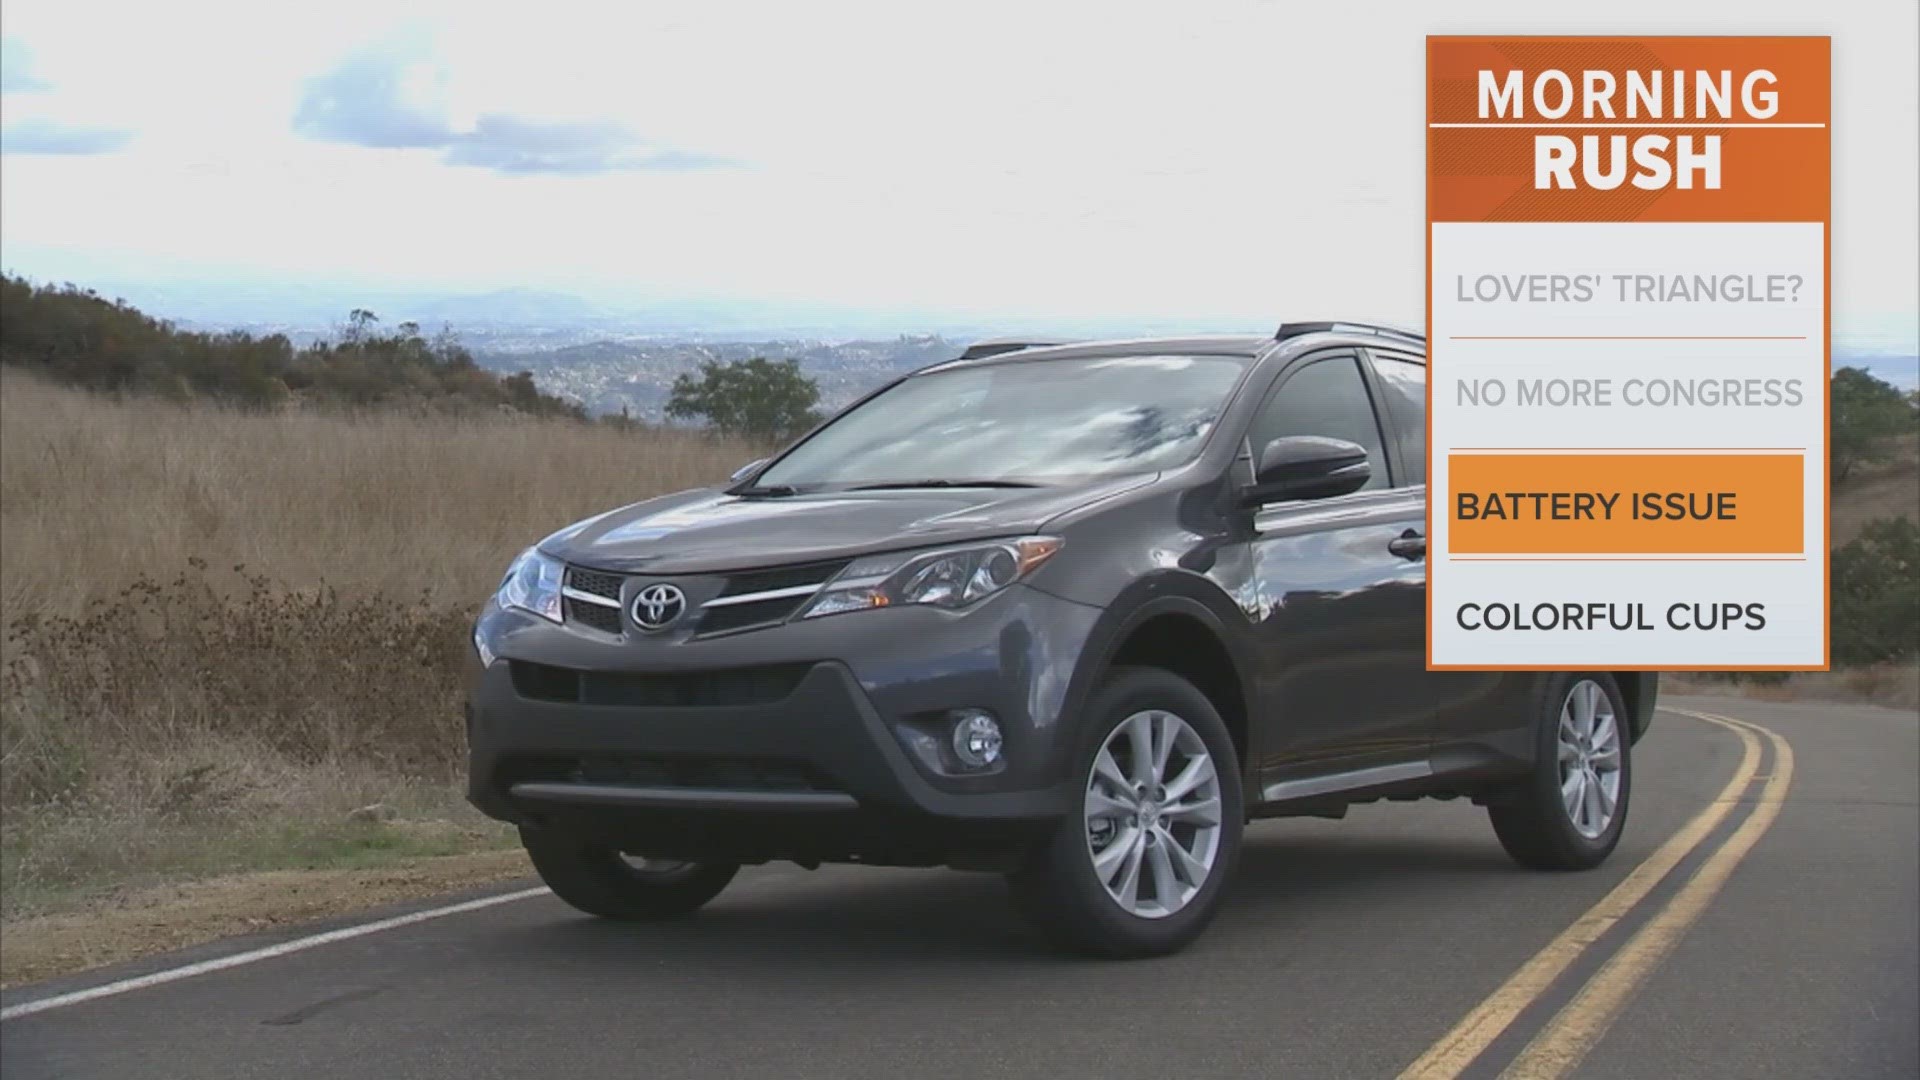 The company is recalling the RAV4 small SUVs in the U.S. to fix a problem with batteries that can move during forceful turns and potentially cause a fire.